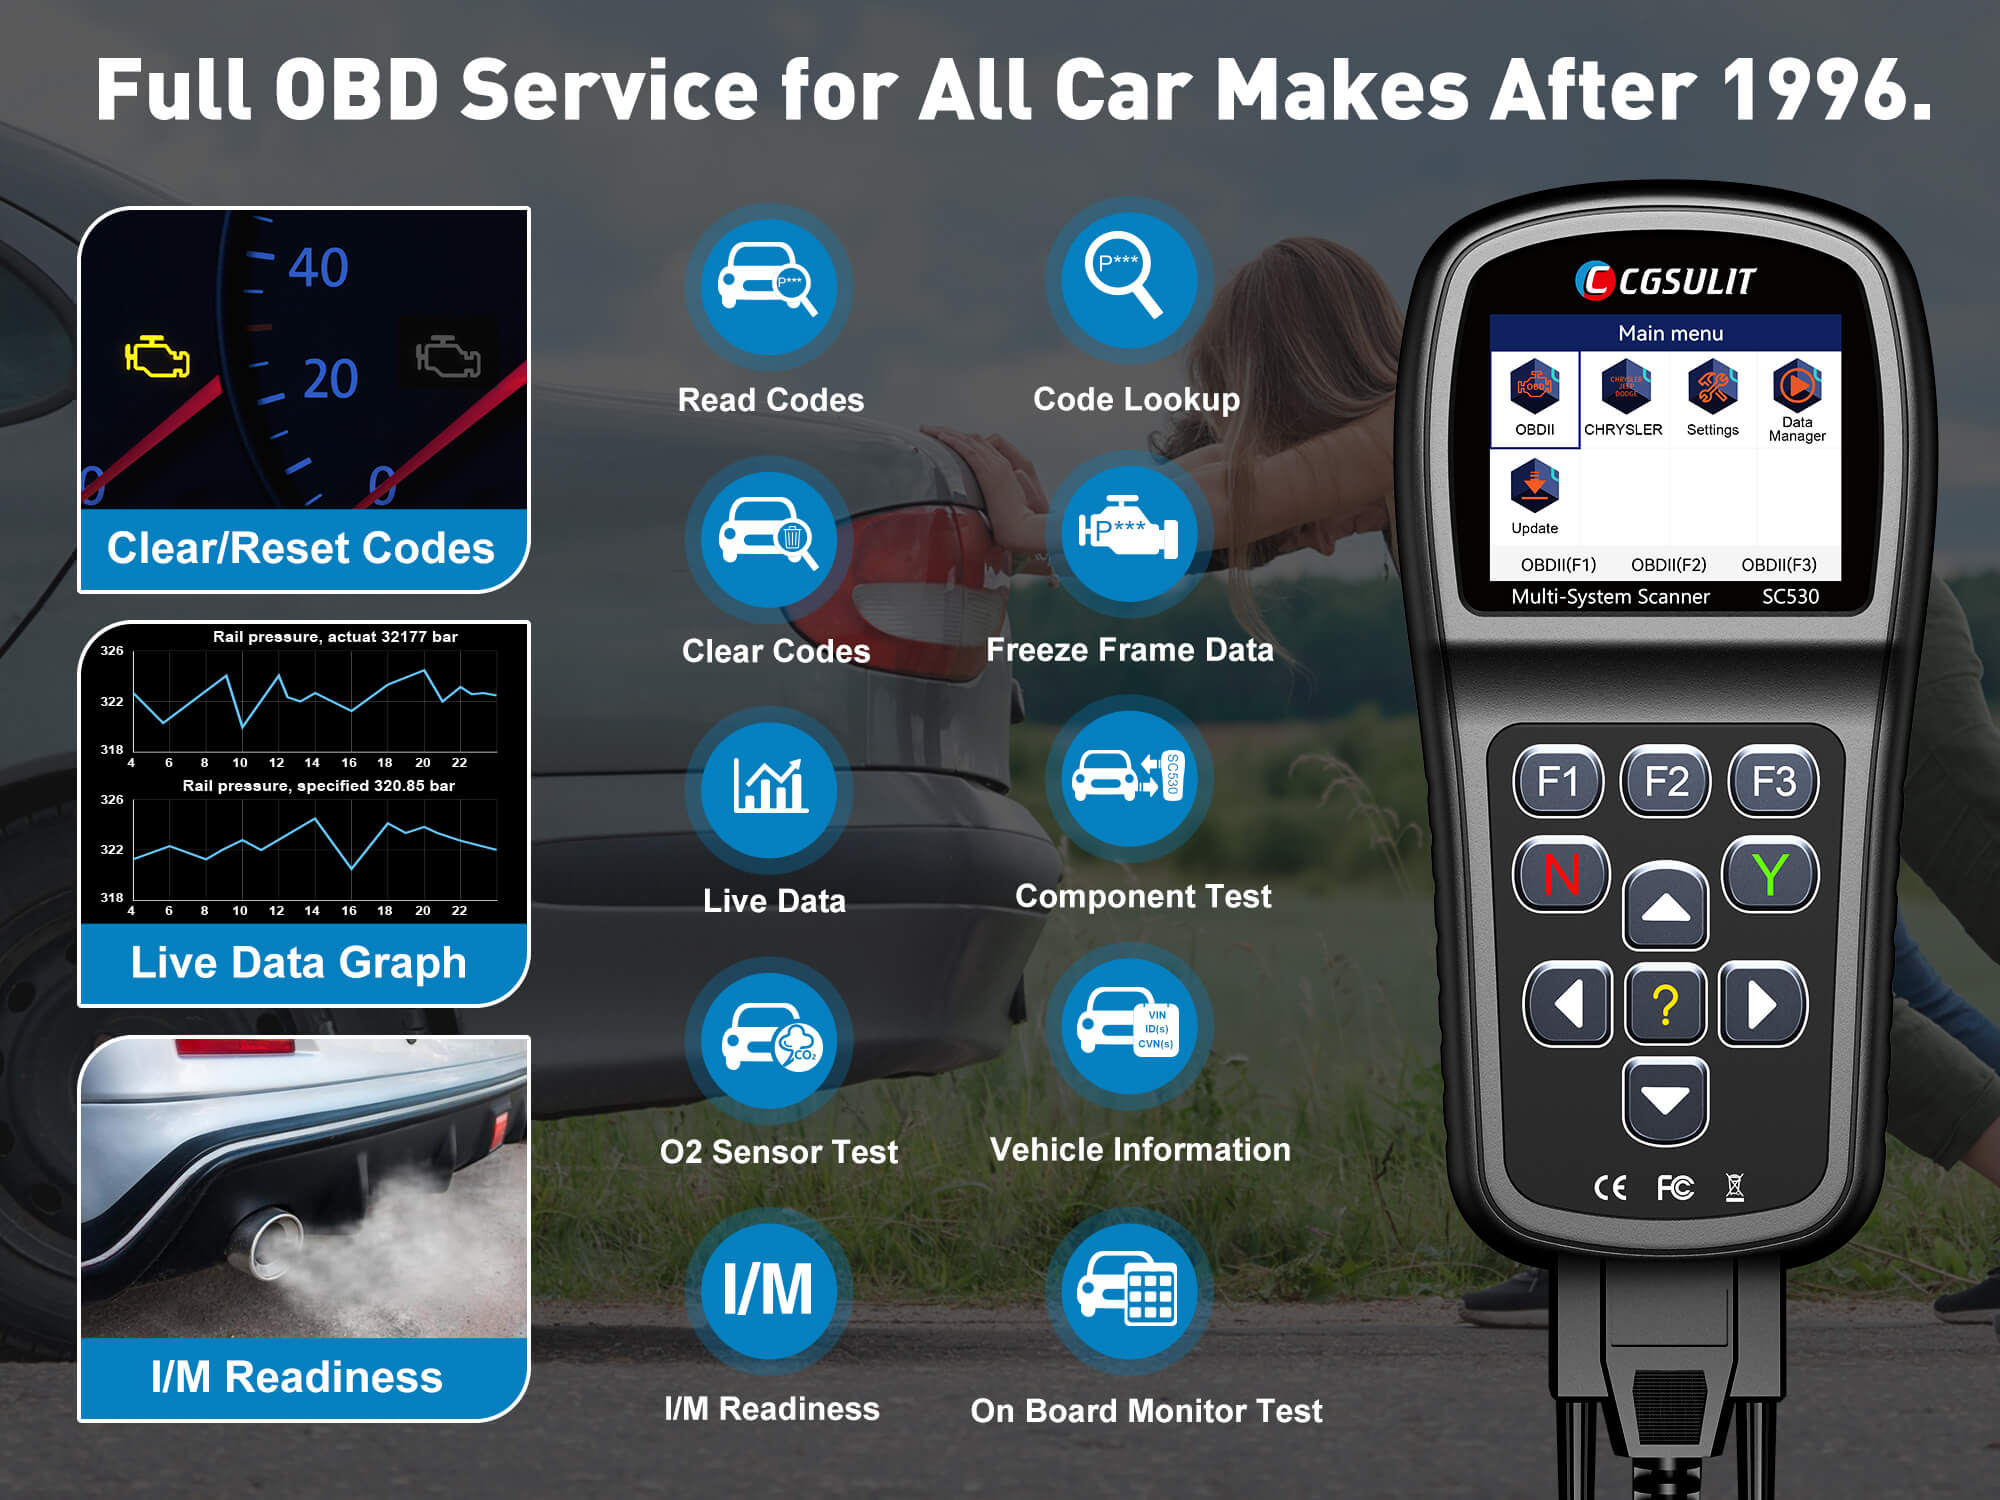 SC530 OBDII code reader support 10 OBD2 modes. It quickly turns off the Check Engine Light(MIL) and helps you pass the smog check.